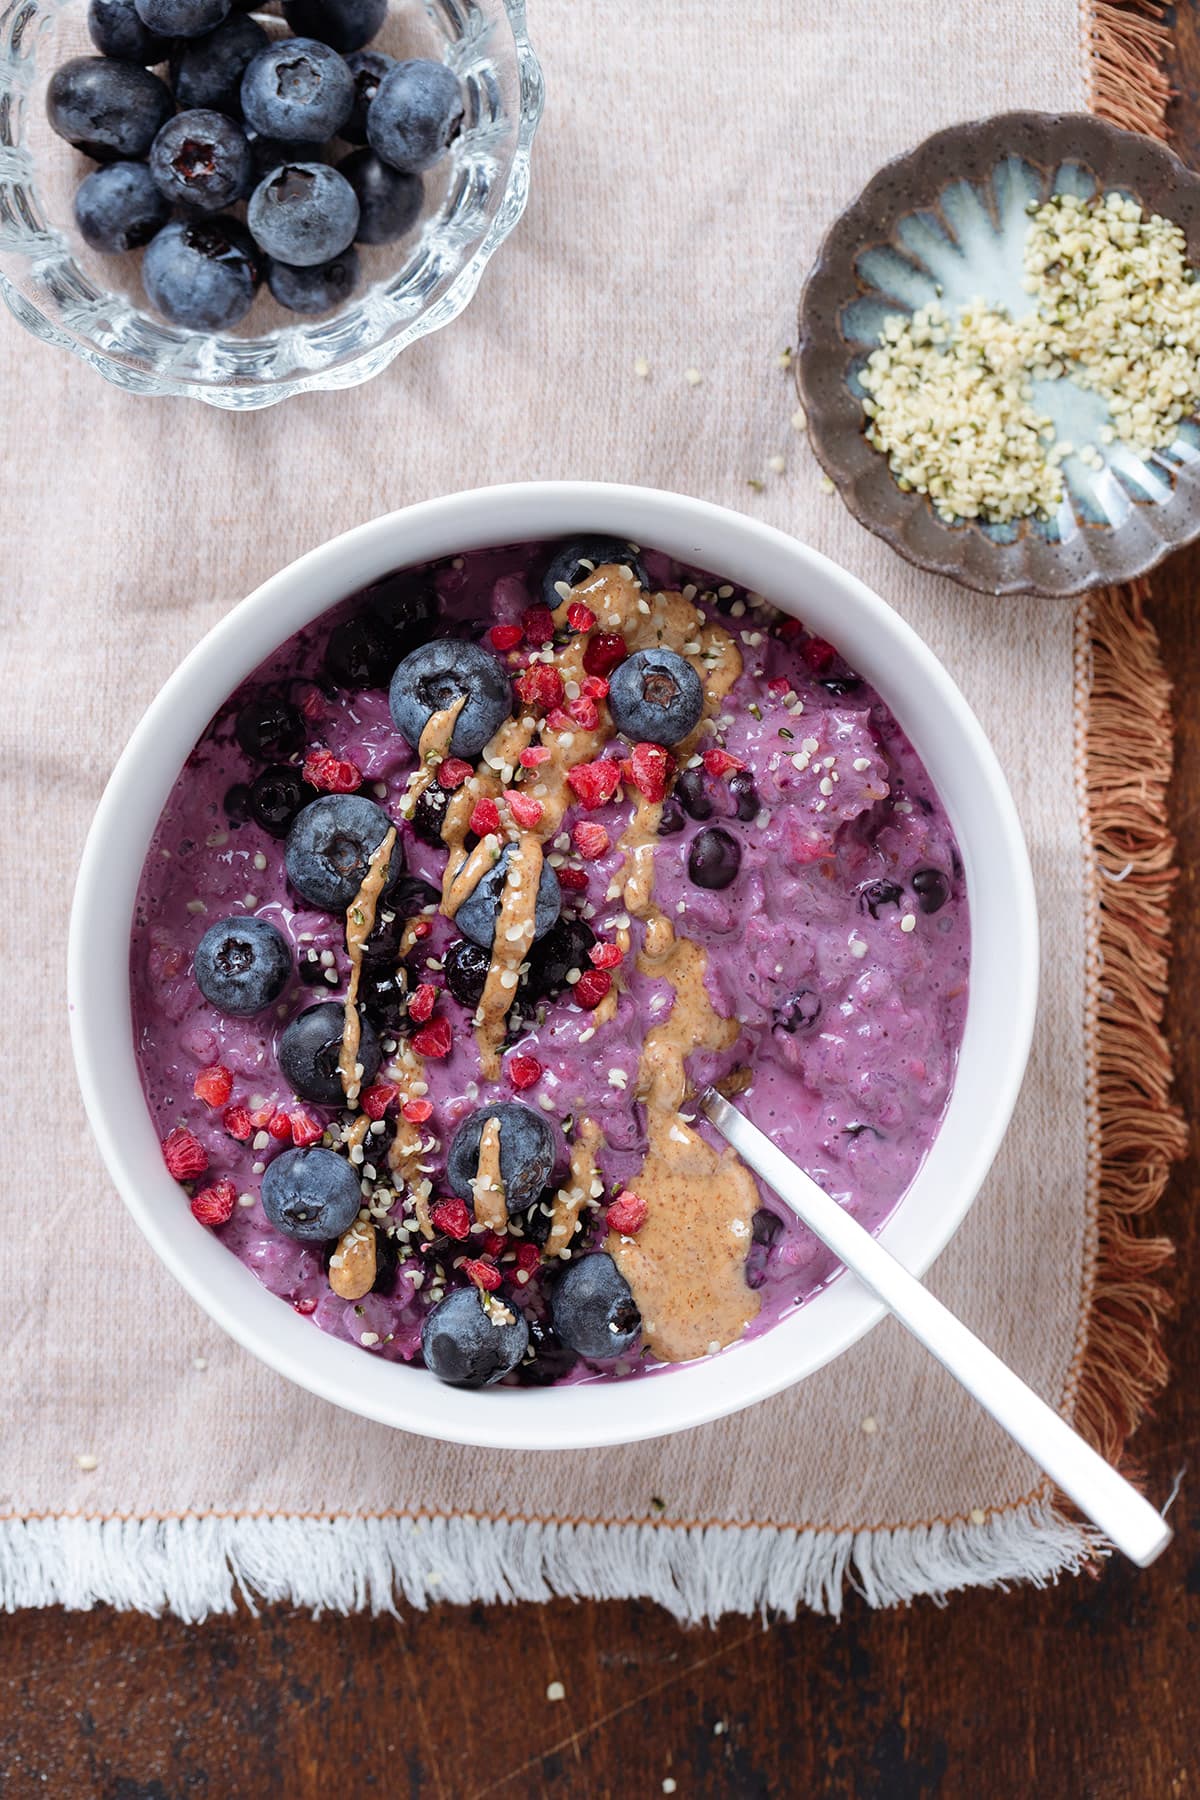 Bright purple blueberry oatmeal in a white bowl garnished with blueberries, nut butter, and hemp seeds on a dark wooden background and a beige tablecloth.